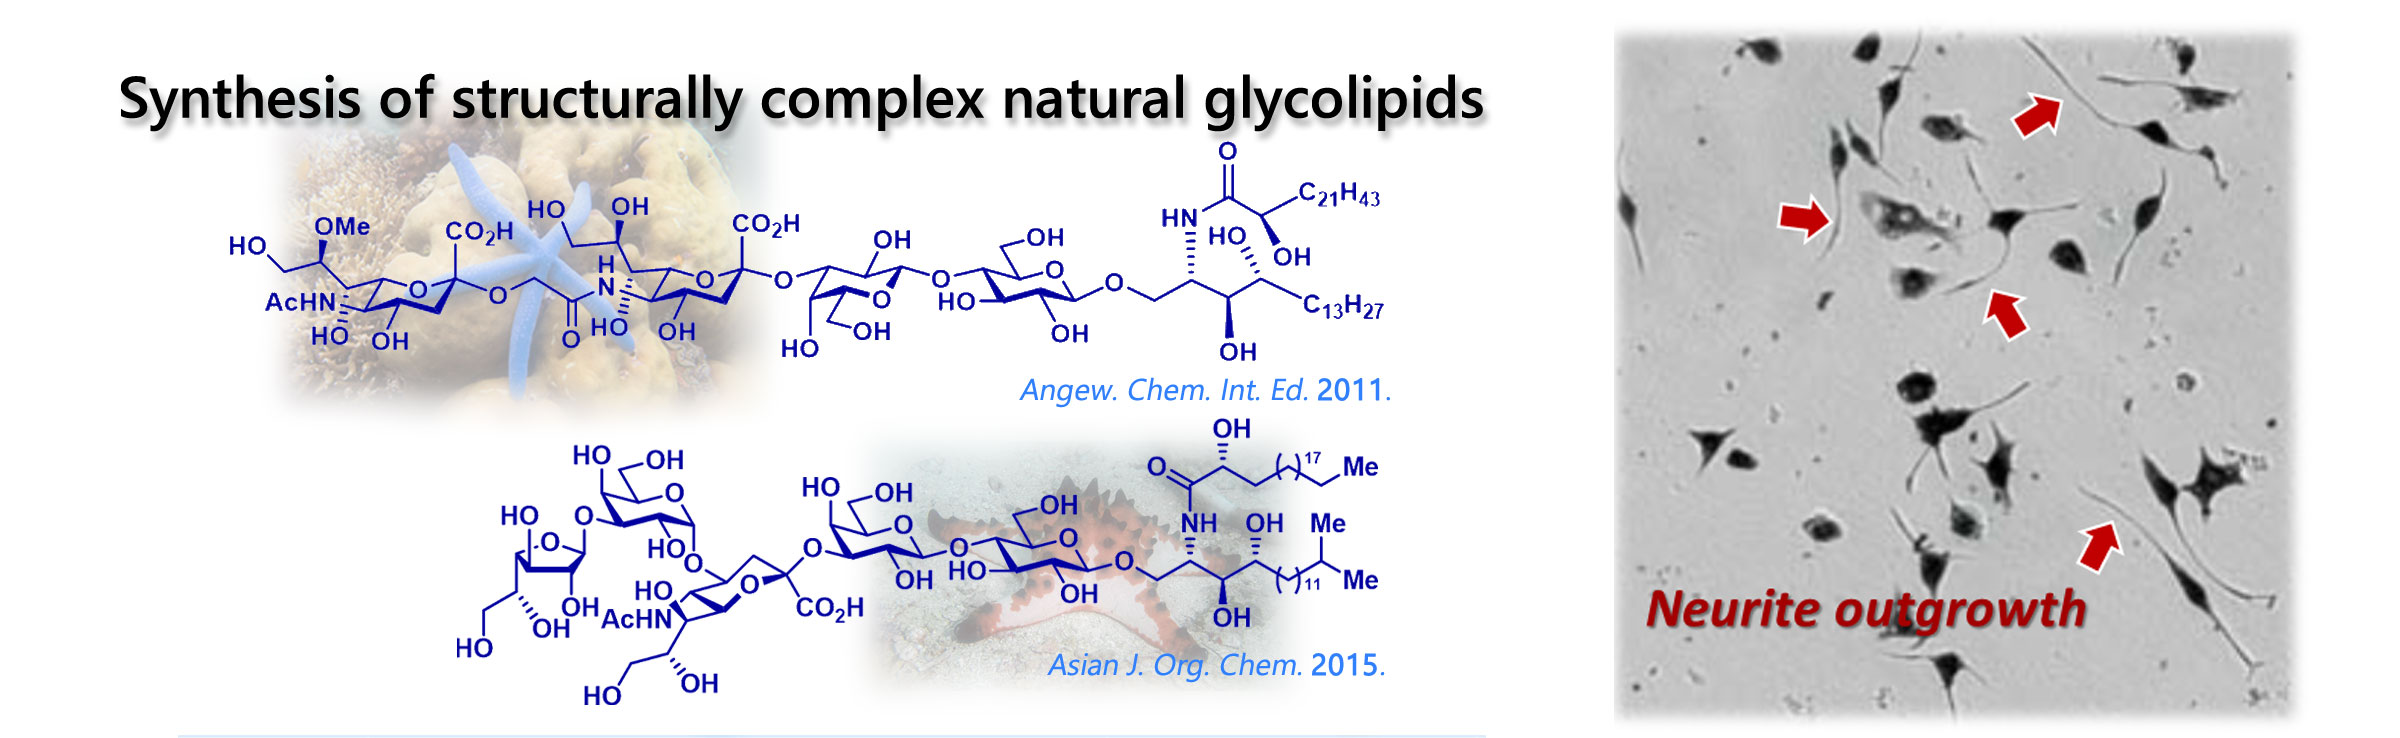 Synthesis of structurally complex natural glycolipids